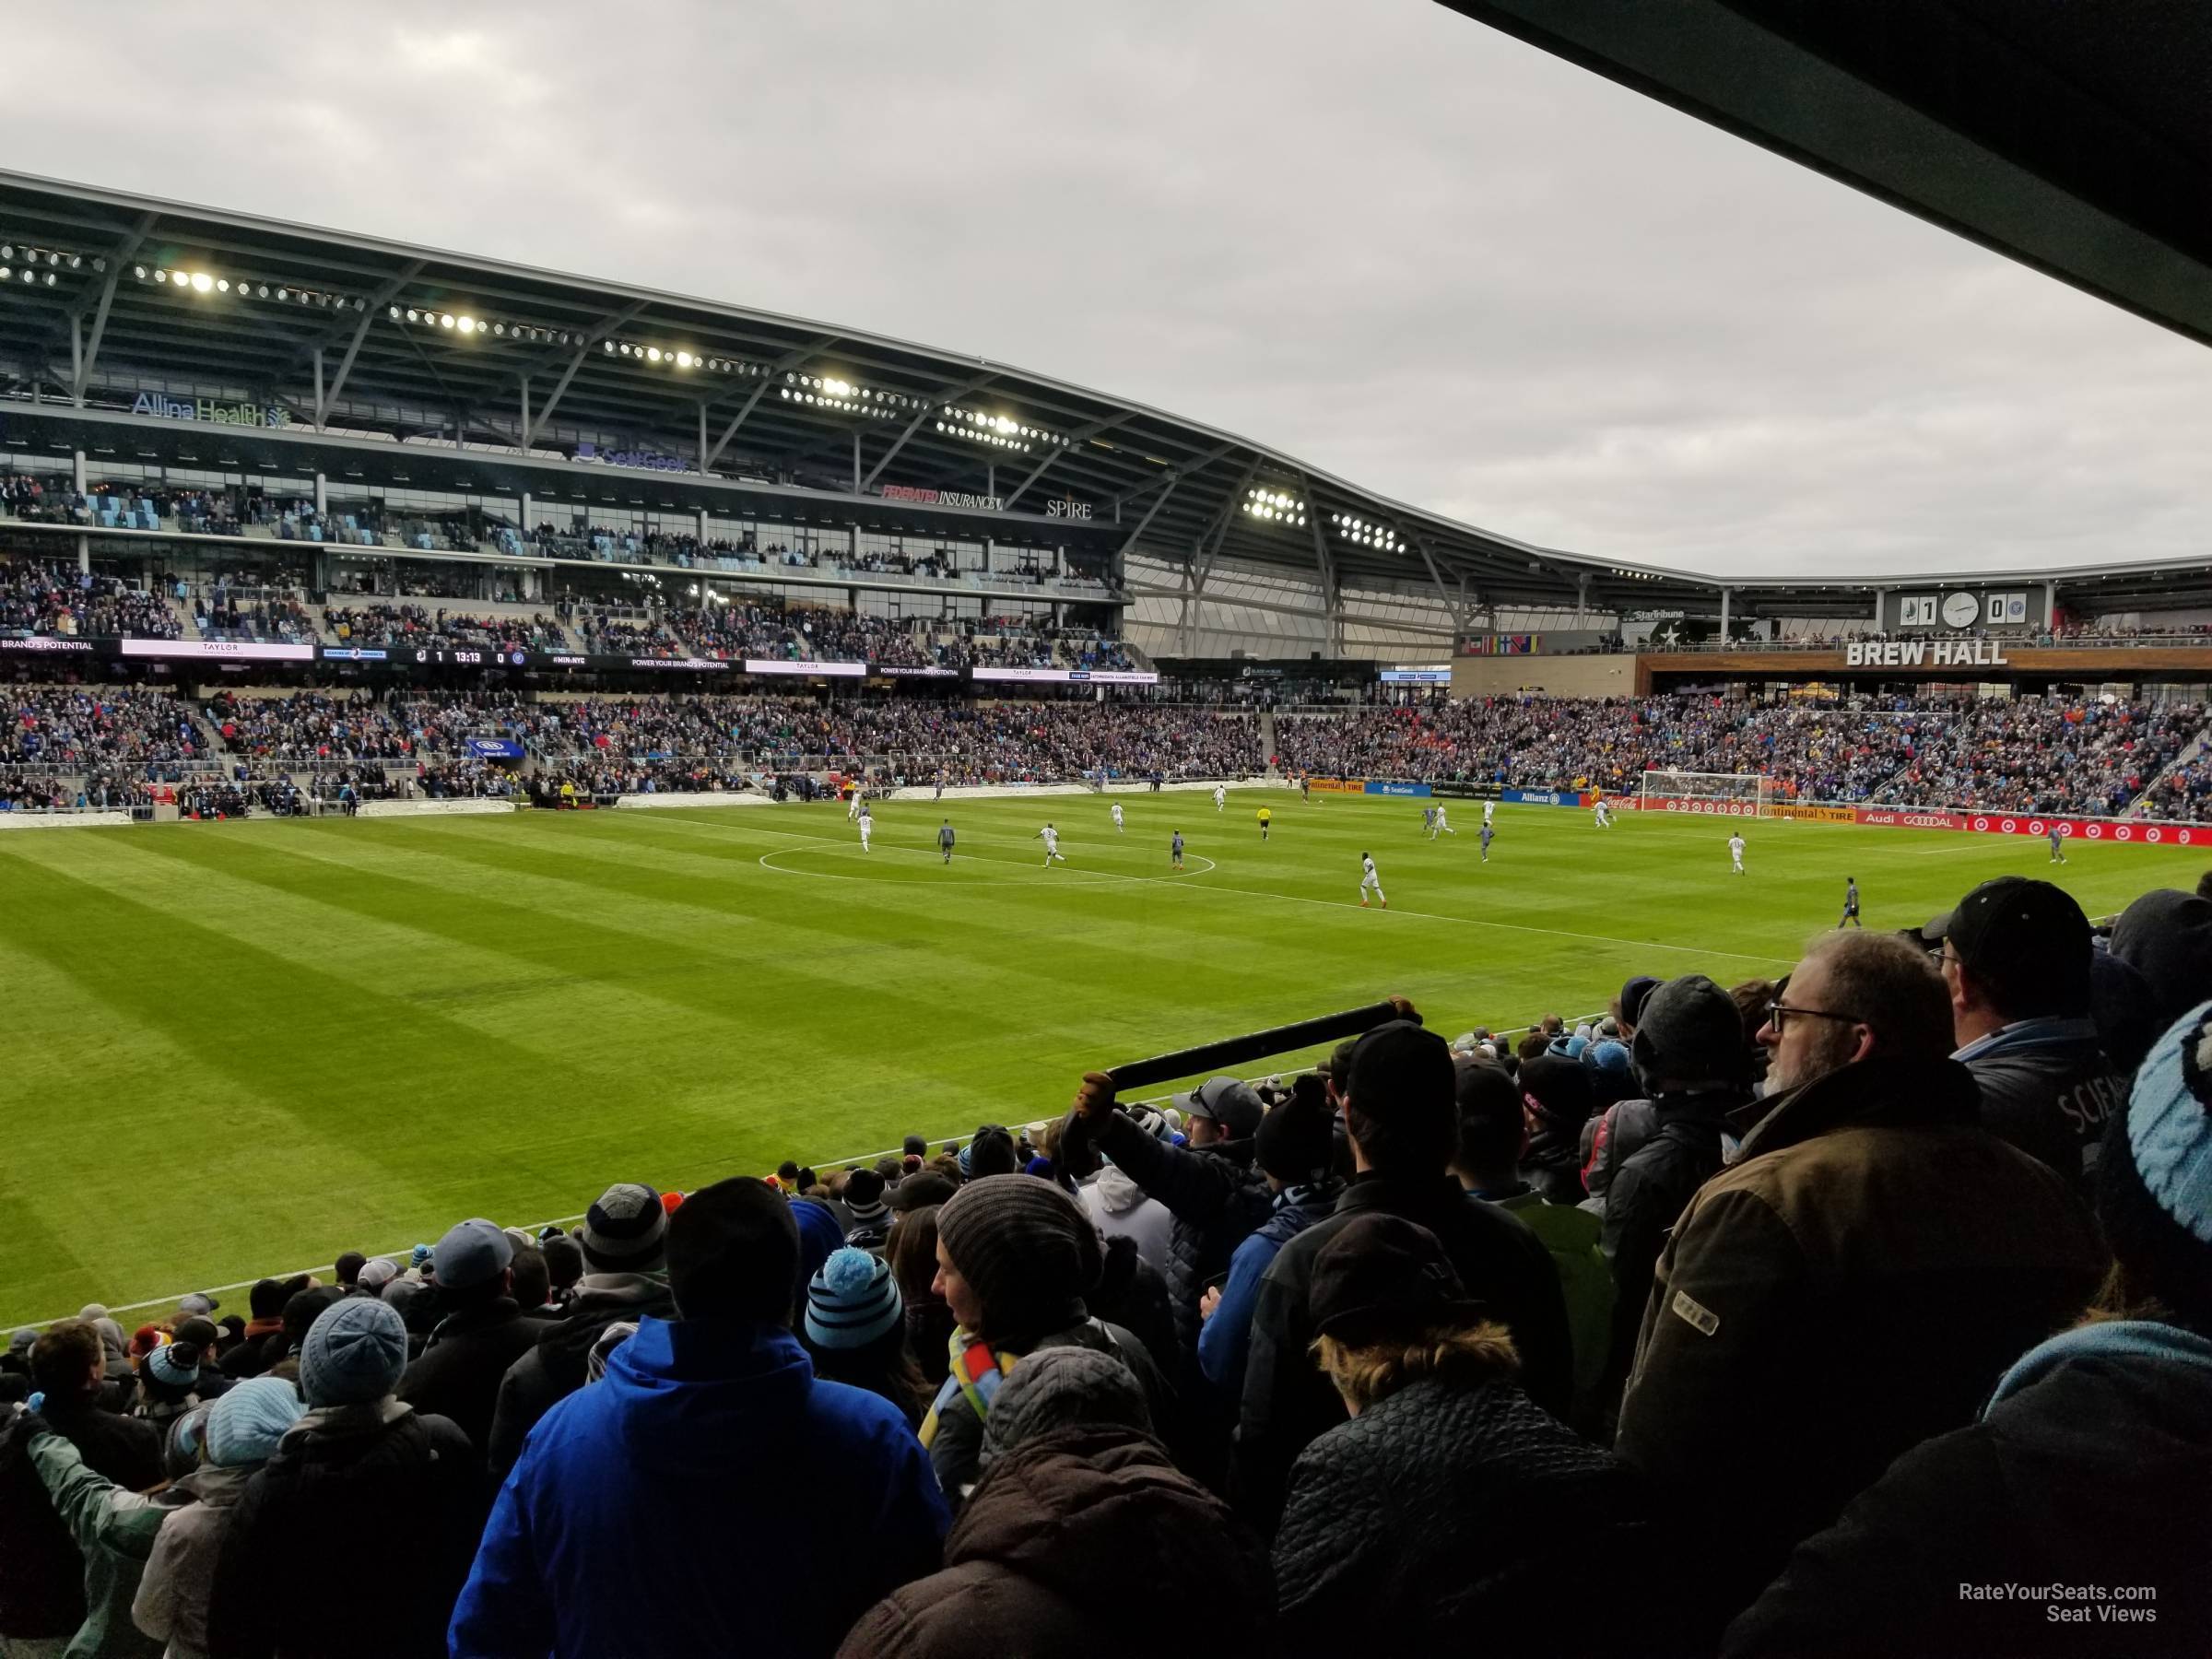 section 17, row 18 seat view  - allianz field